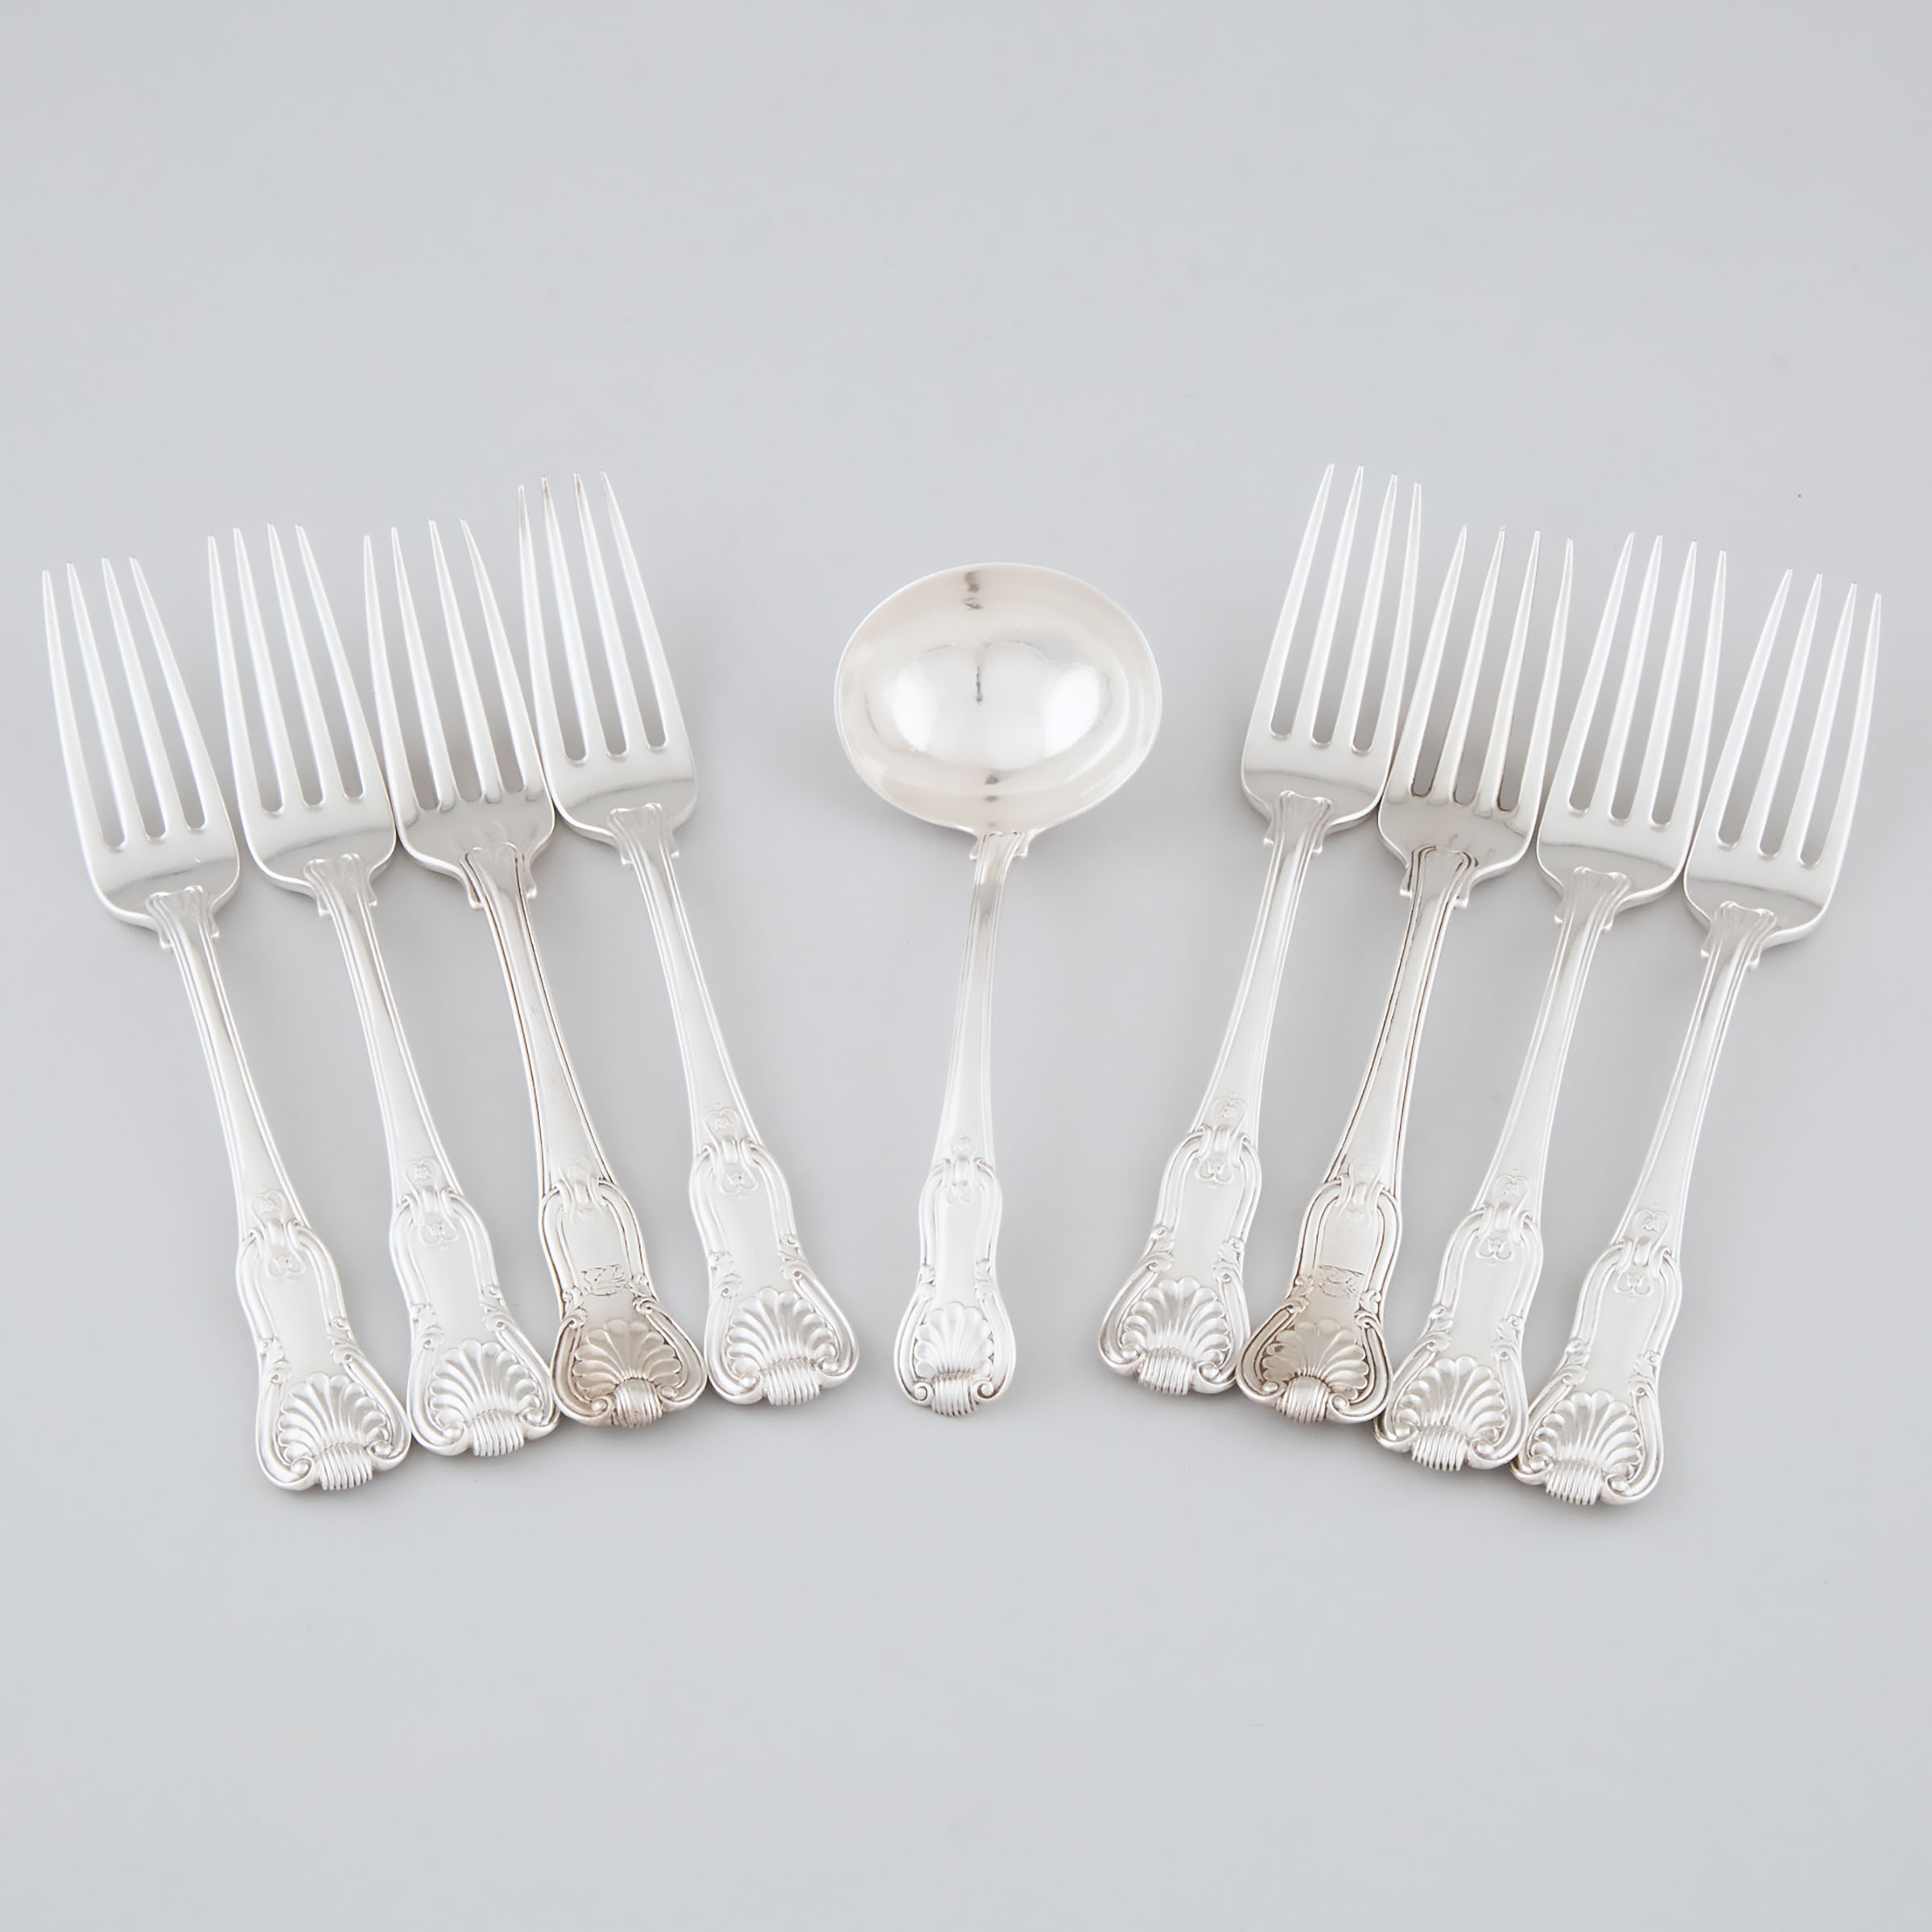 Eight George III Silver Hourglass Pattern Table Forks and a Gravy Ladle, Paul Storr, London, 1812/18